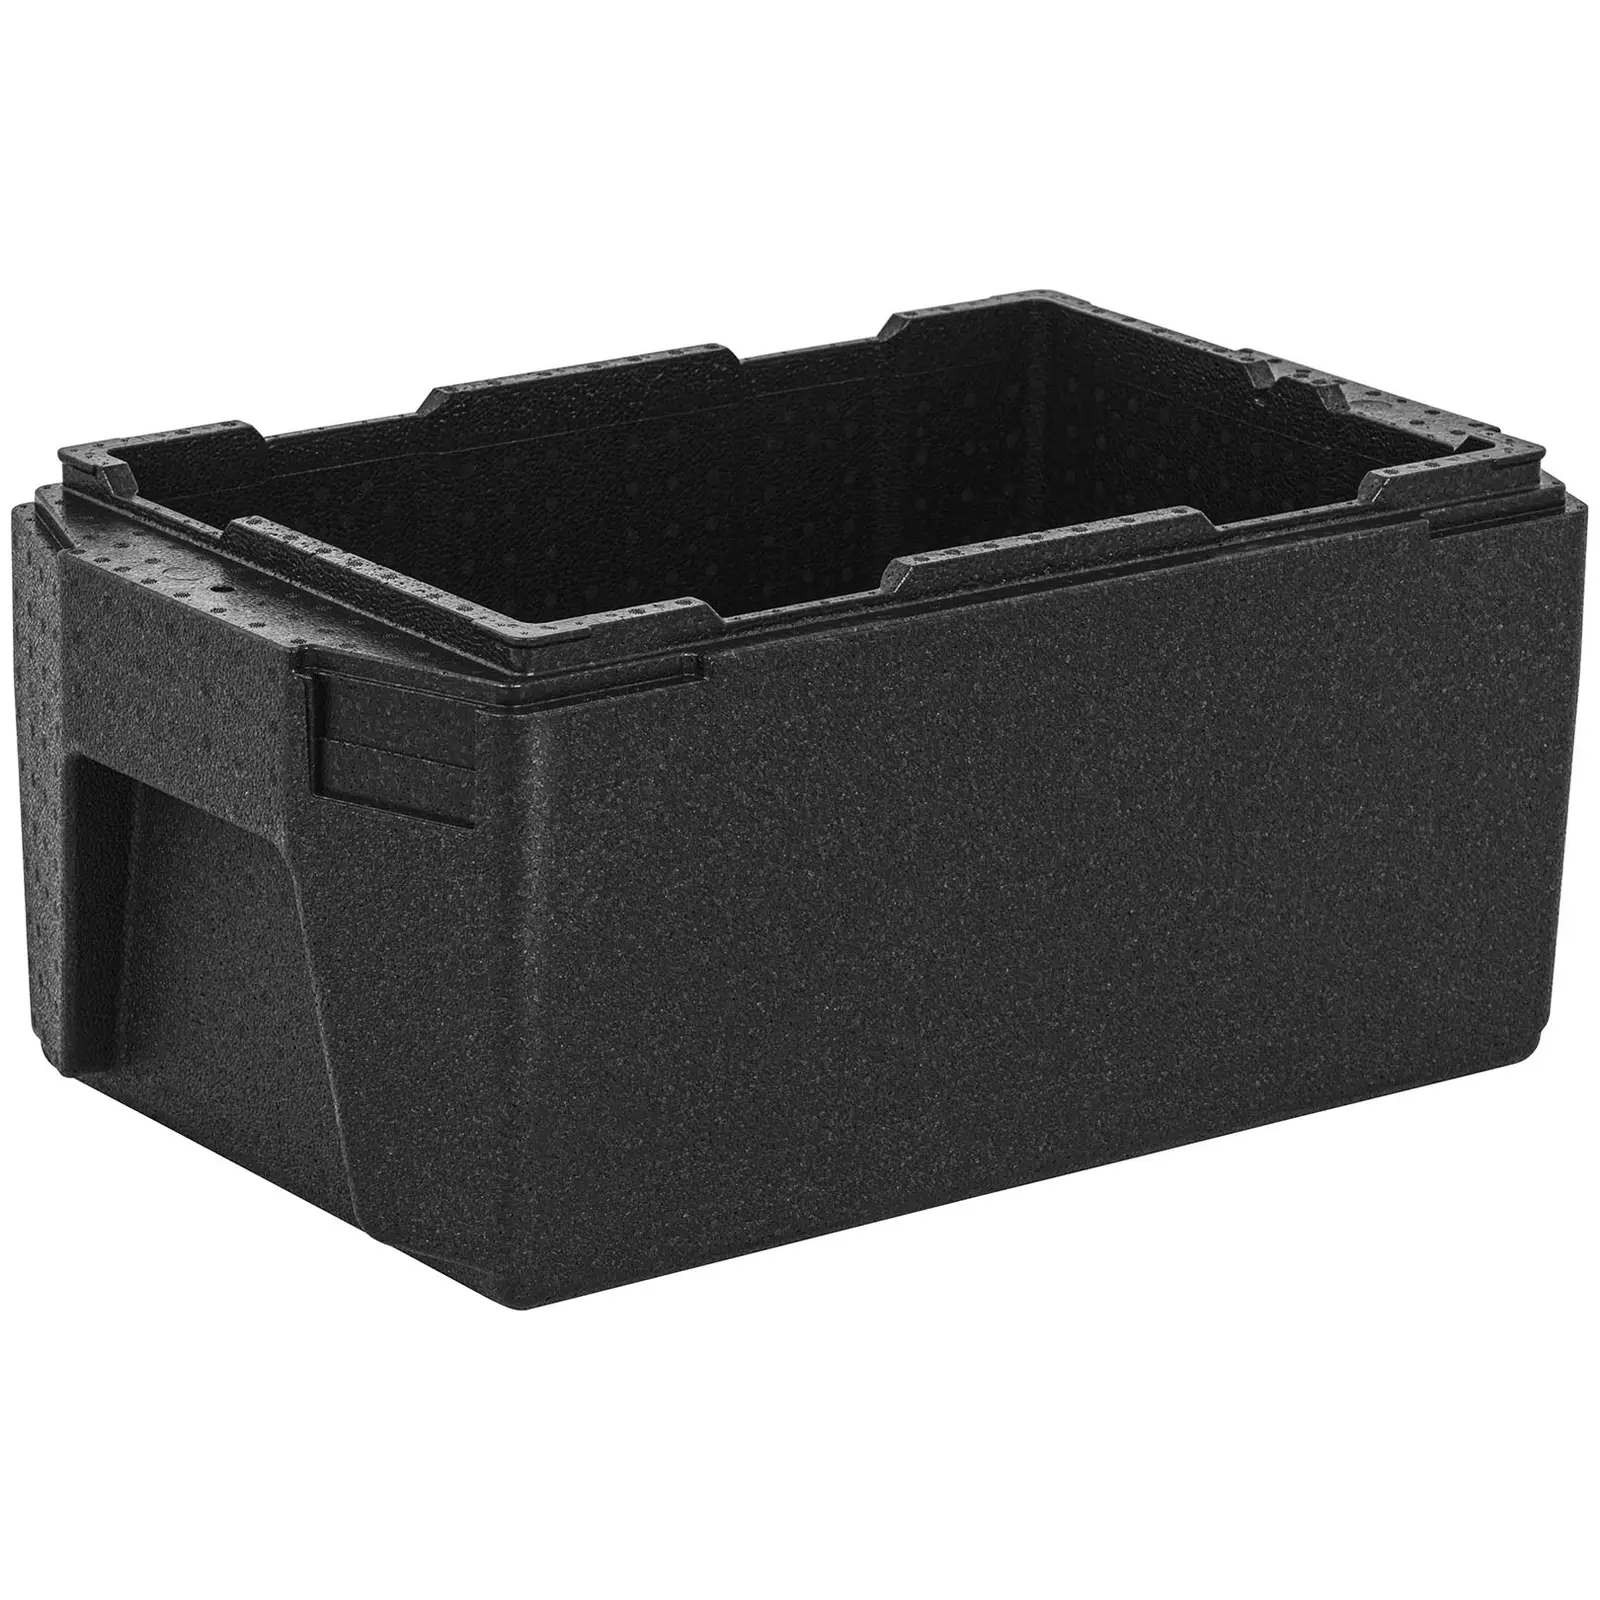 Thermobox - GN 1/1 container (20 cm deep) - XXL handles